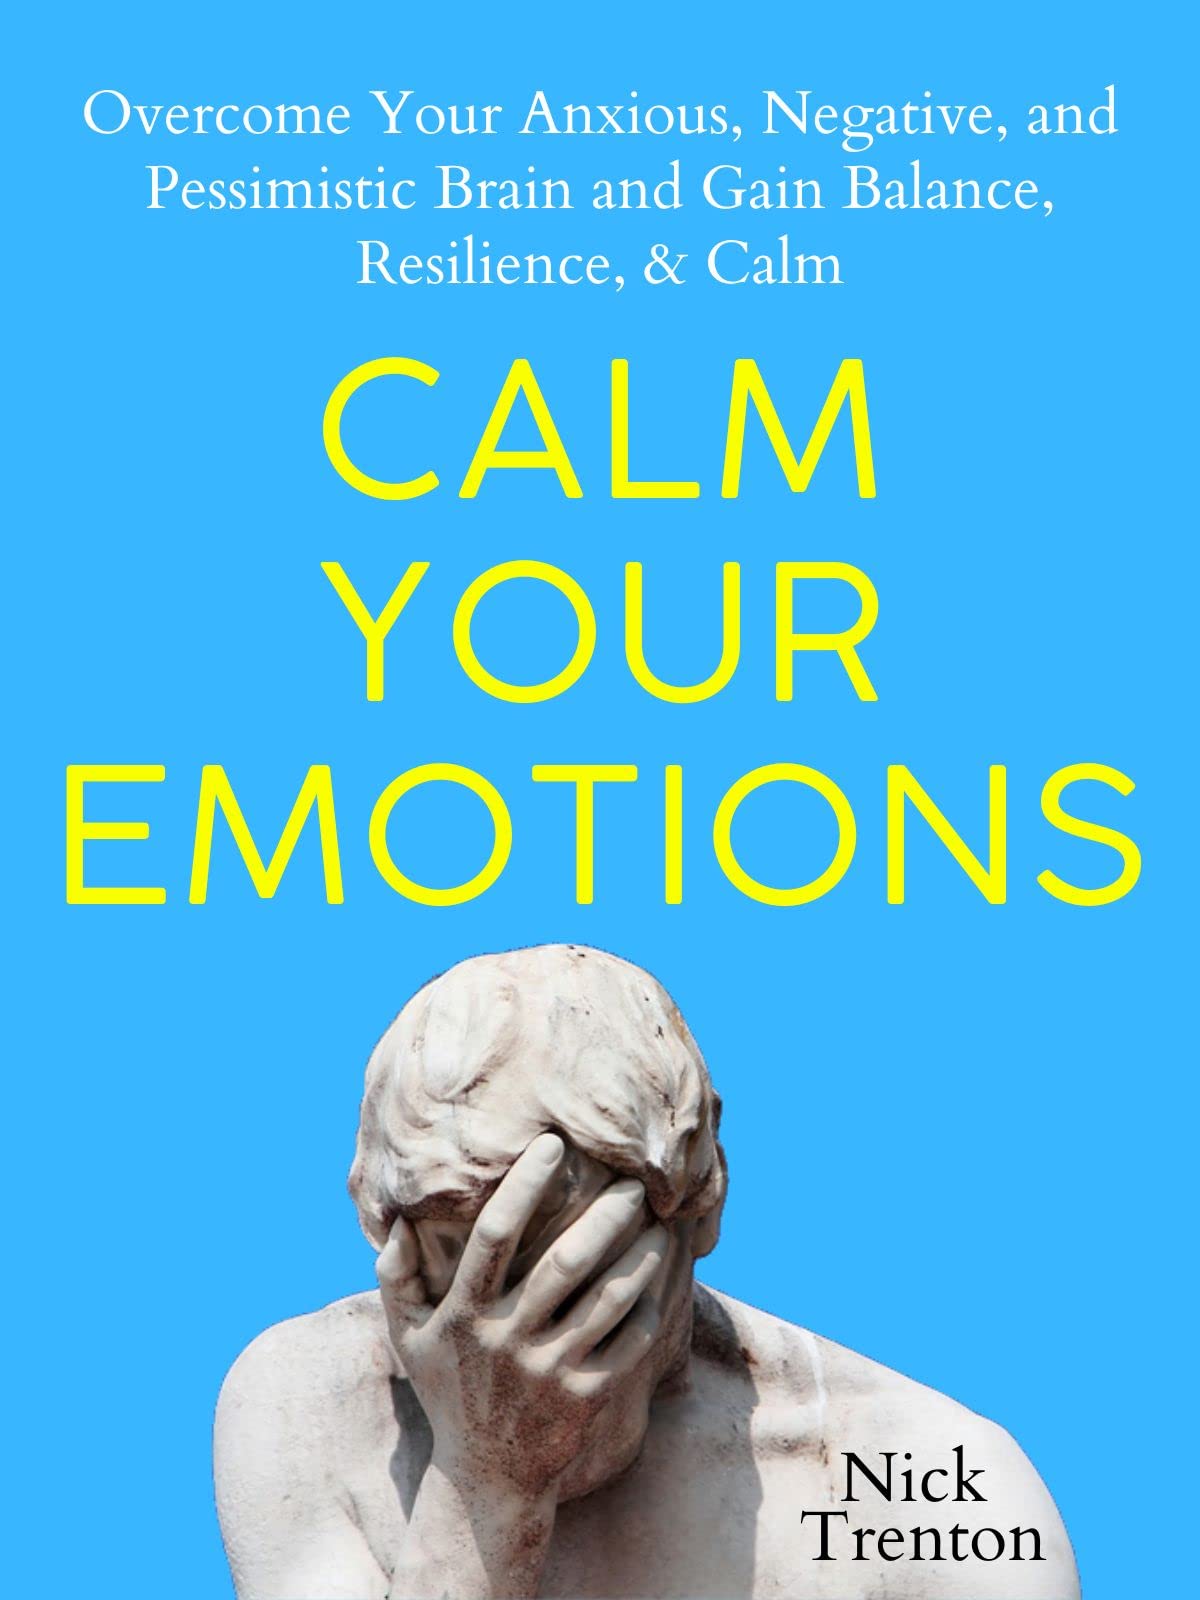 Calm Your Emotions: Overcome Your Anxious, Negative, and Pessimistic Brain and Find Balance, Resilience, & Calm (The Path to Calm Book 10)